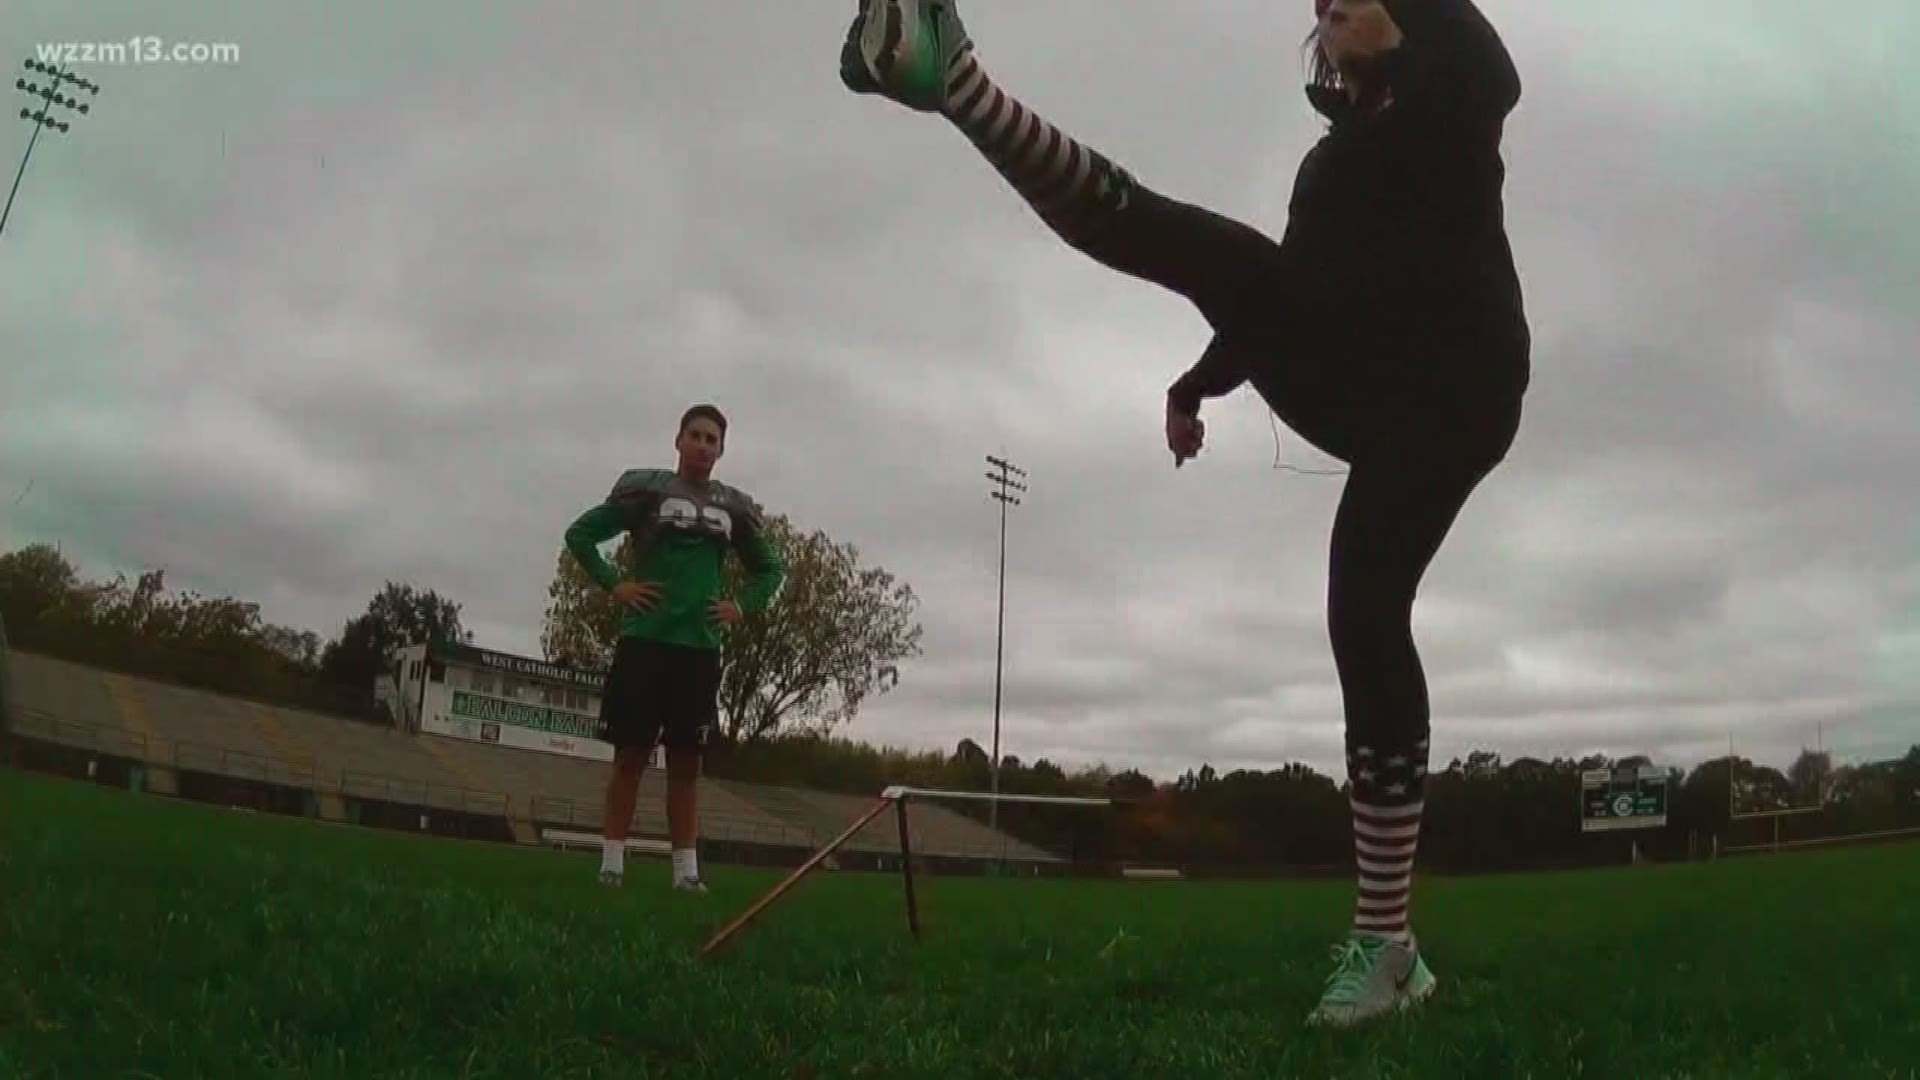 Kamady learns how to kick a field goal from the state champion kicker at West Catholic High School.